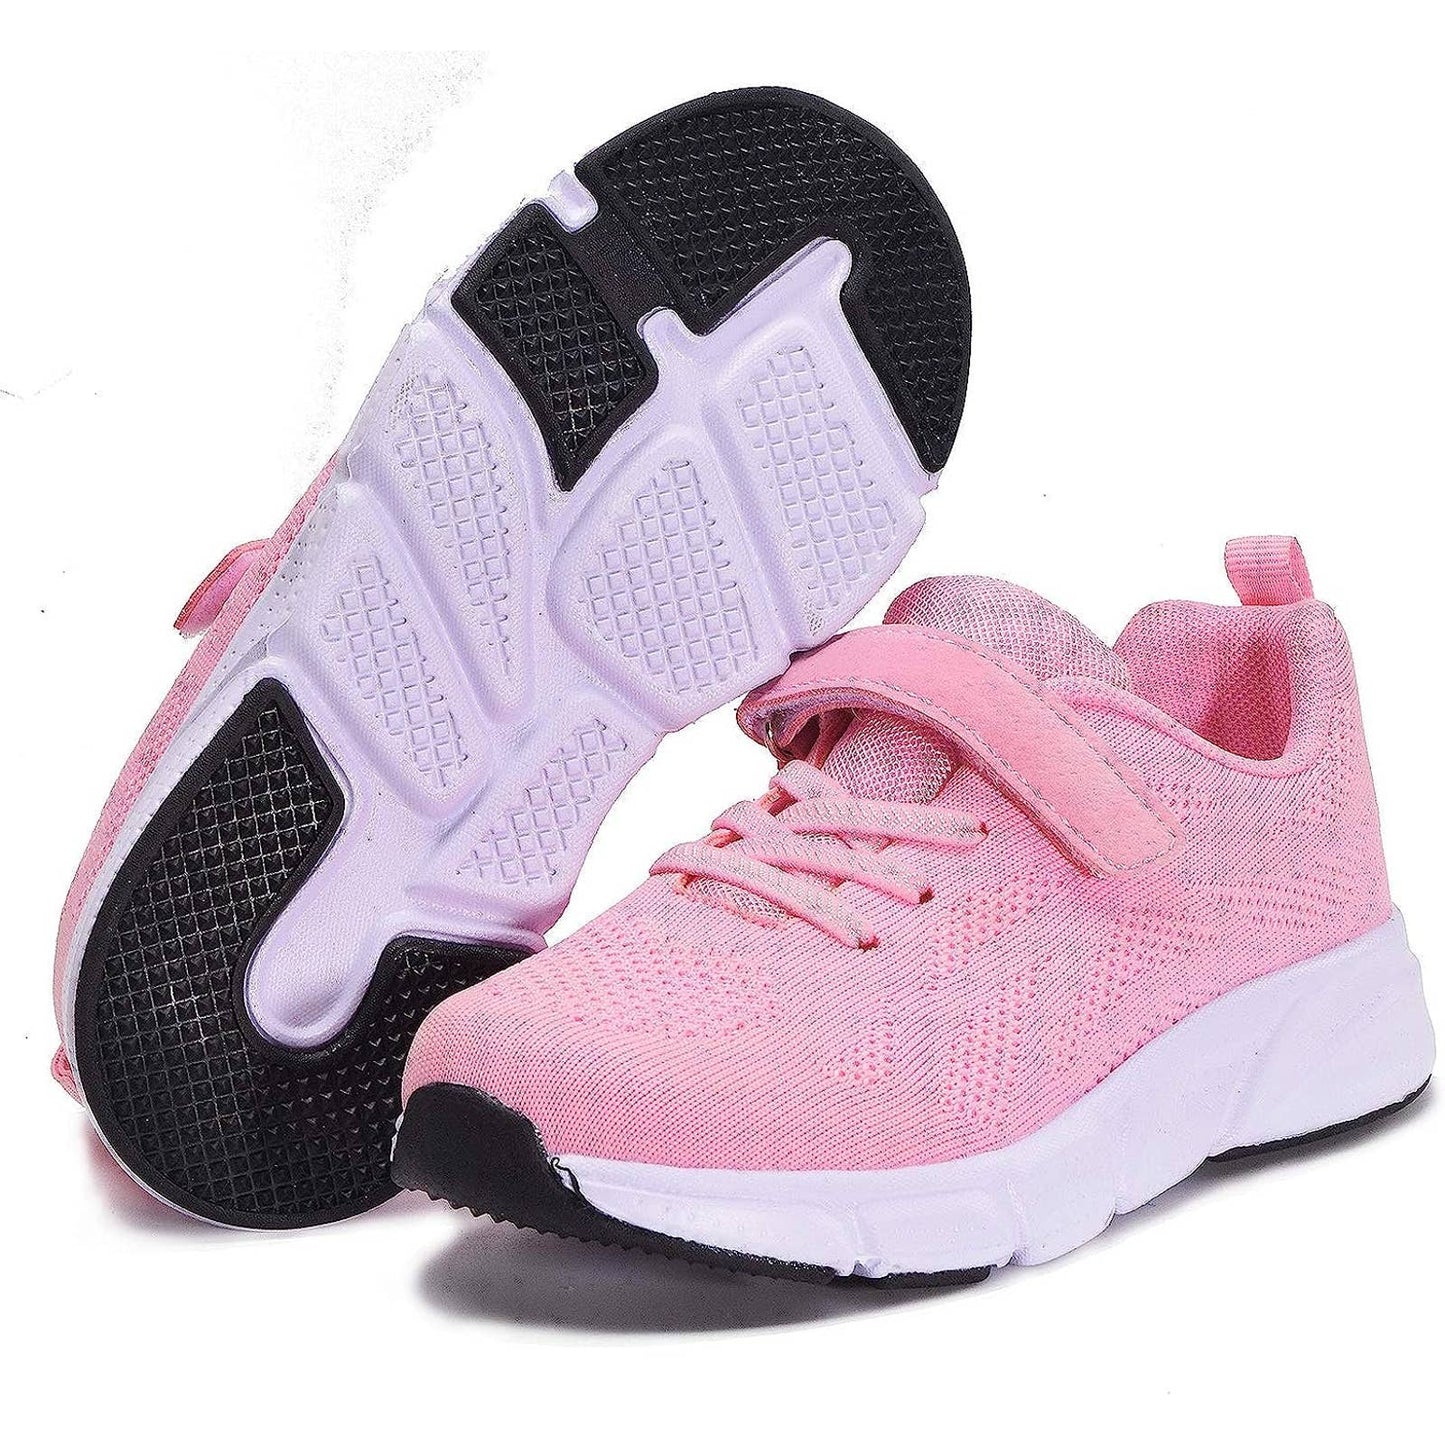 KVbabby Trainers children's sports shoes breathable trainers EU 30 / 12 US